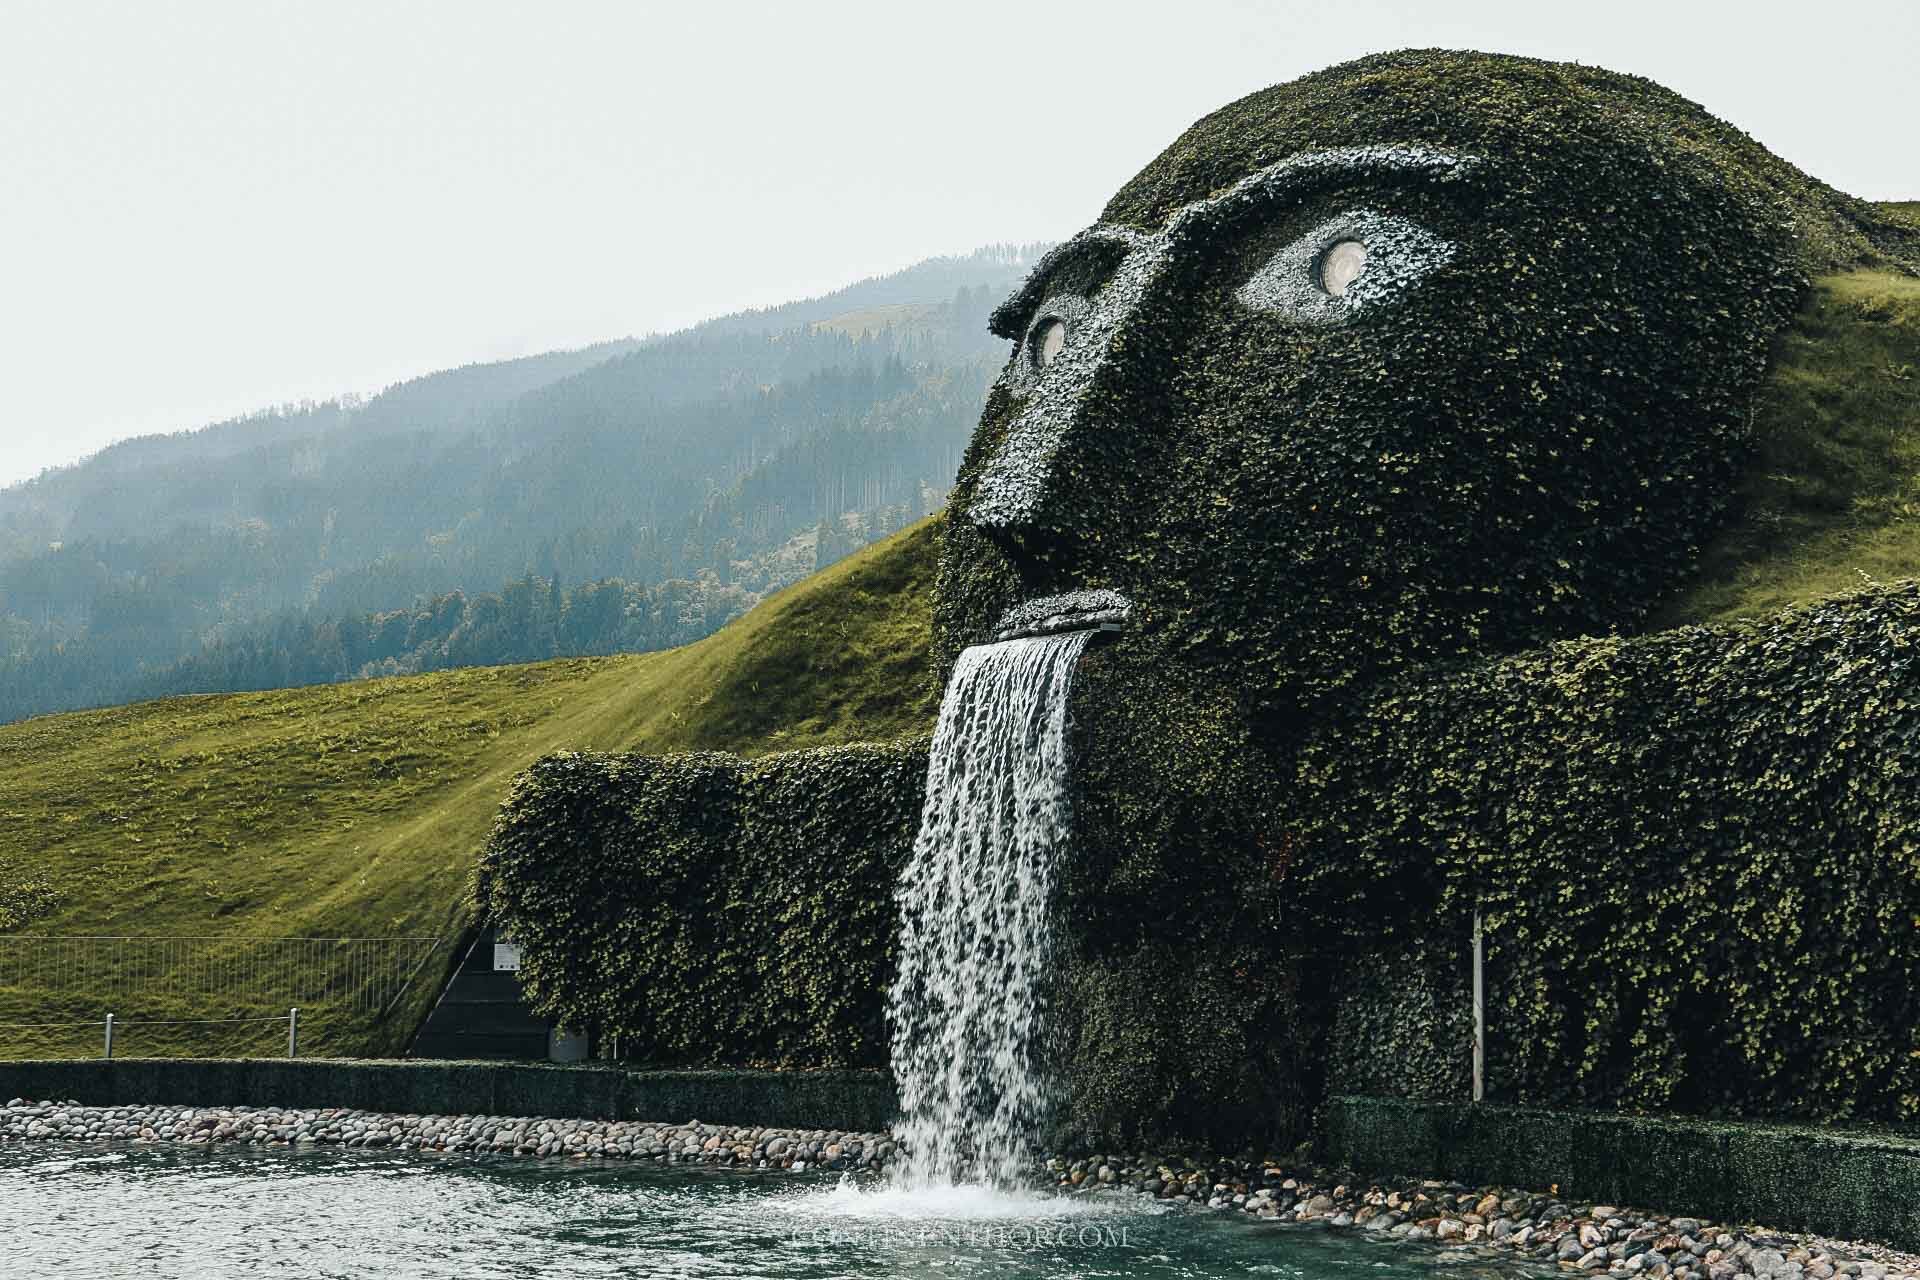 the green giant outside the Swarovski crystal world to be visited on your Innsbruck itinerary